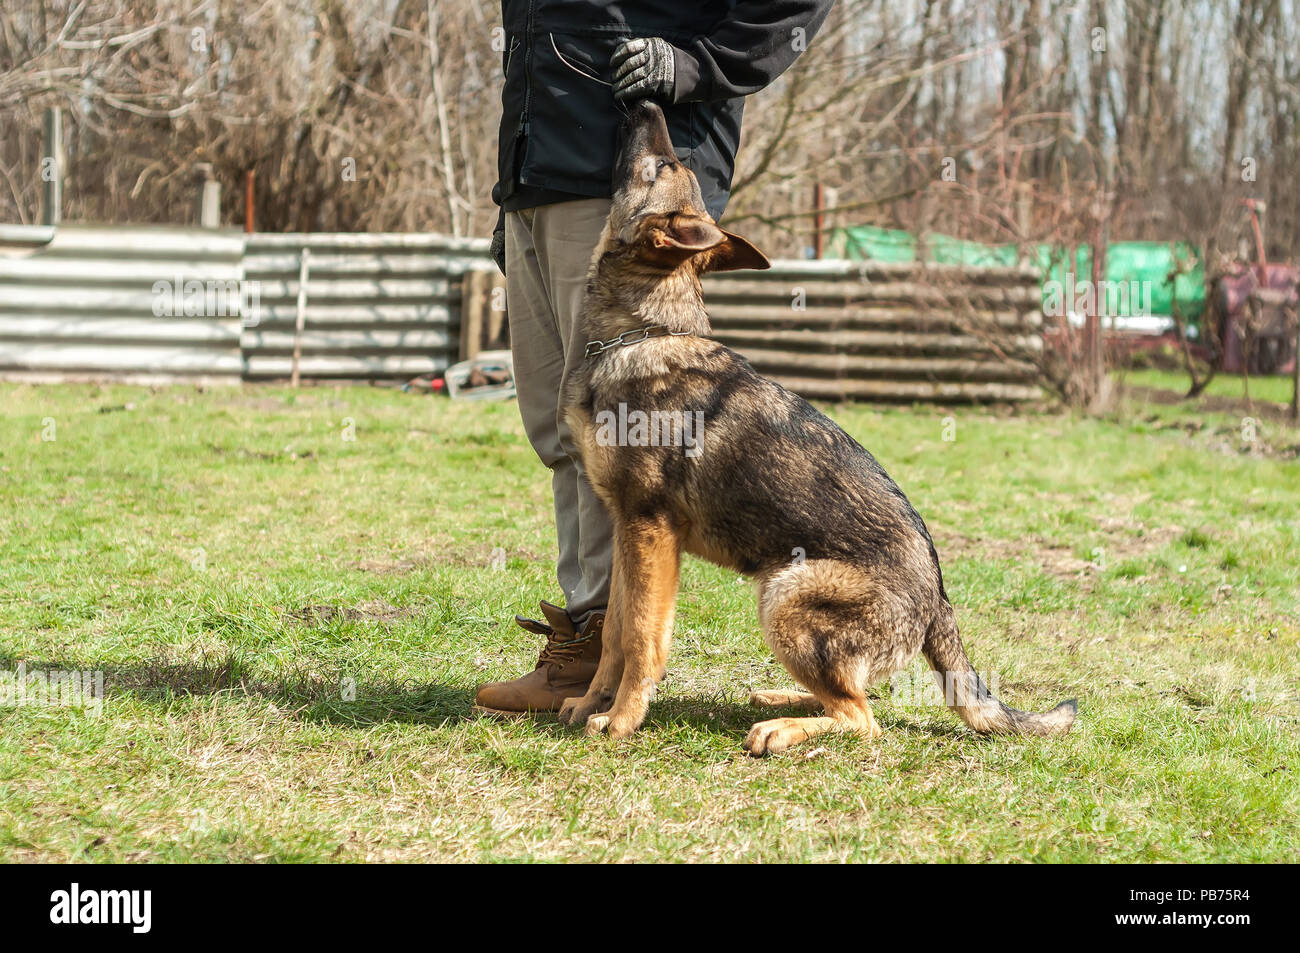 A german shepherd puppy trained by a dog trainer in a green environment at a sunny springtime. Stock Photo